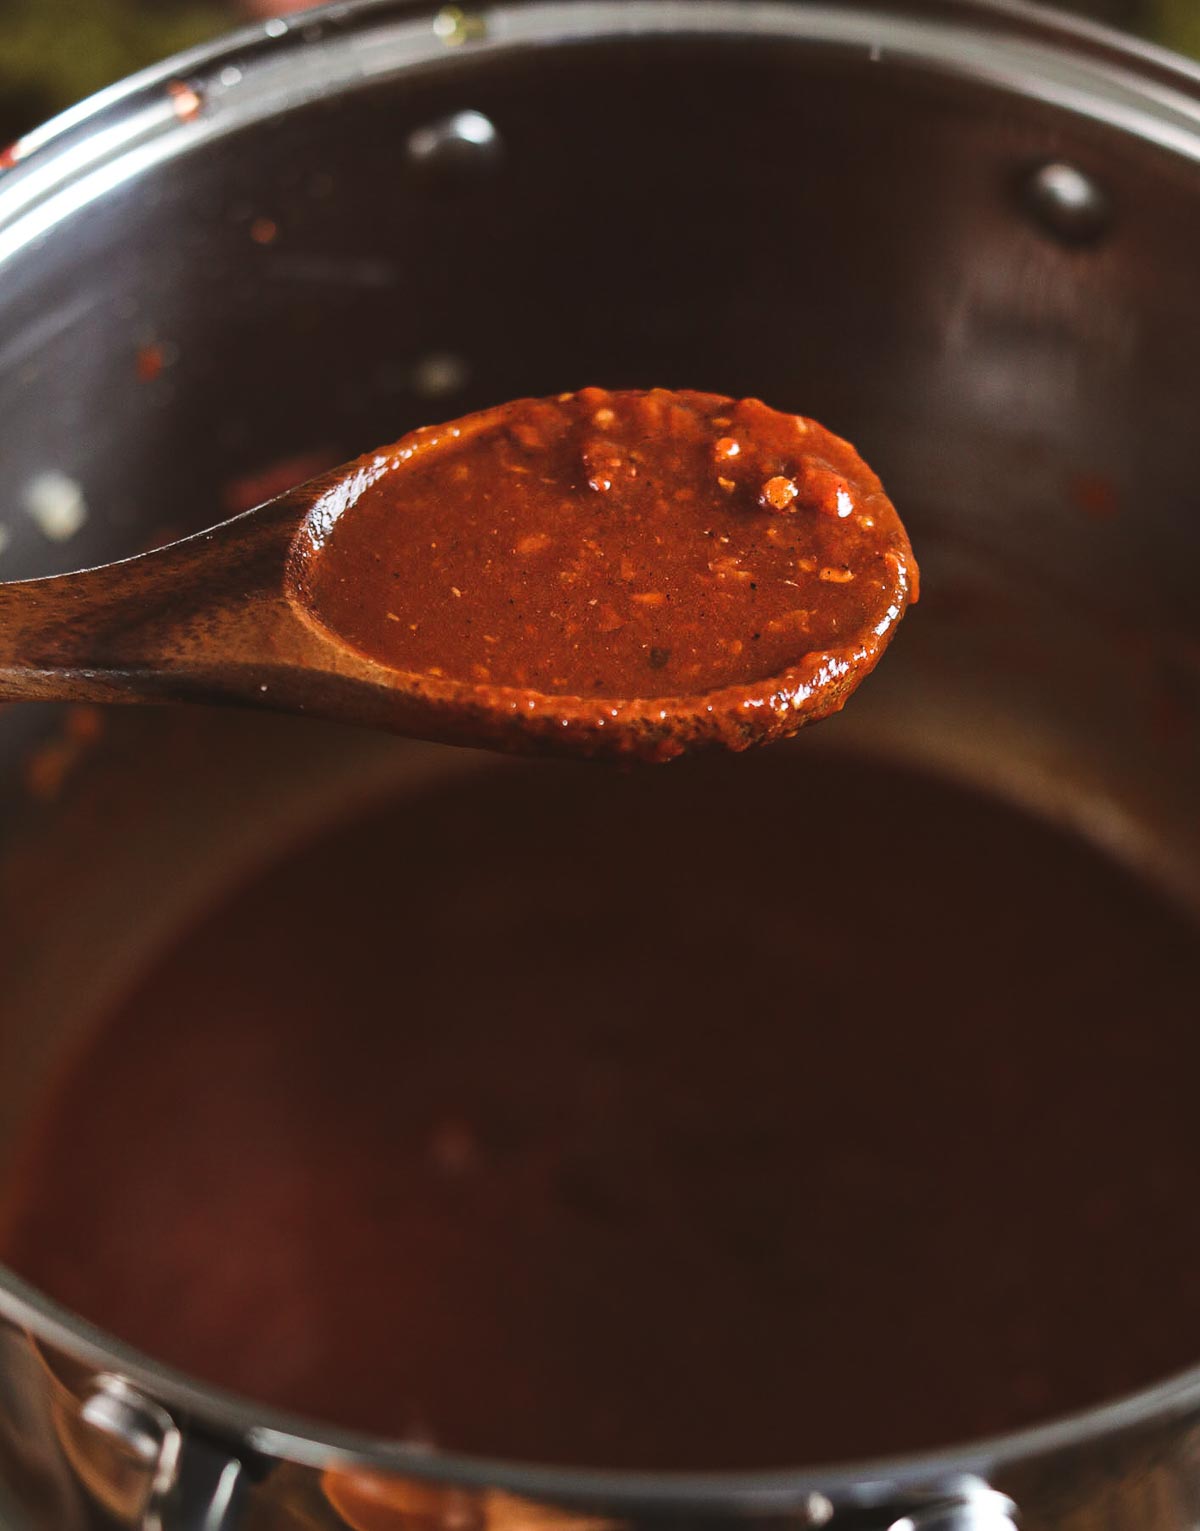 A close up of the thick red sauce on a wooden spoon.